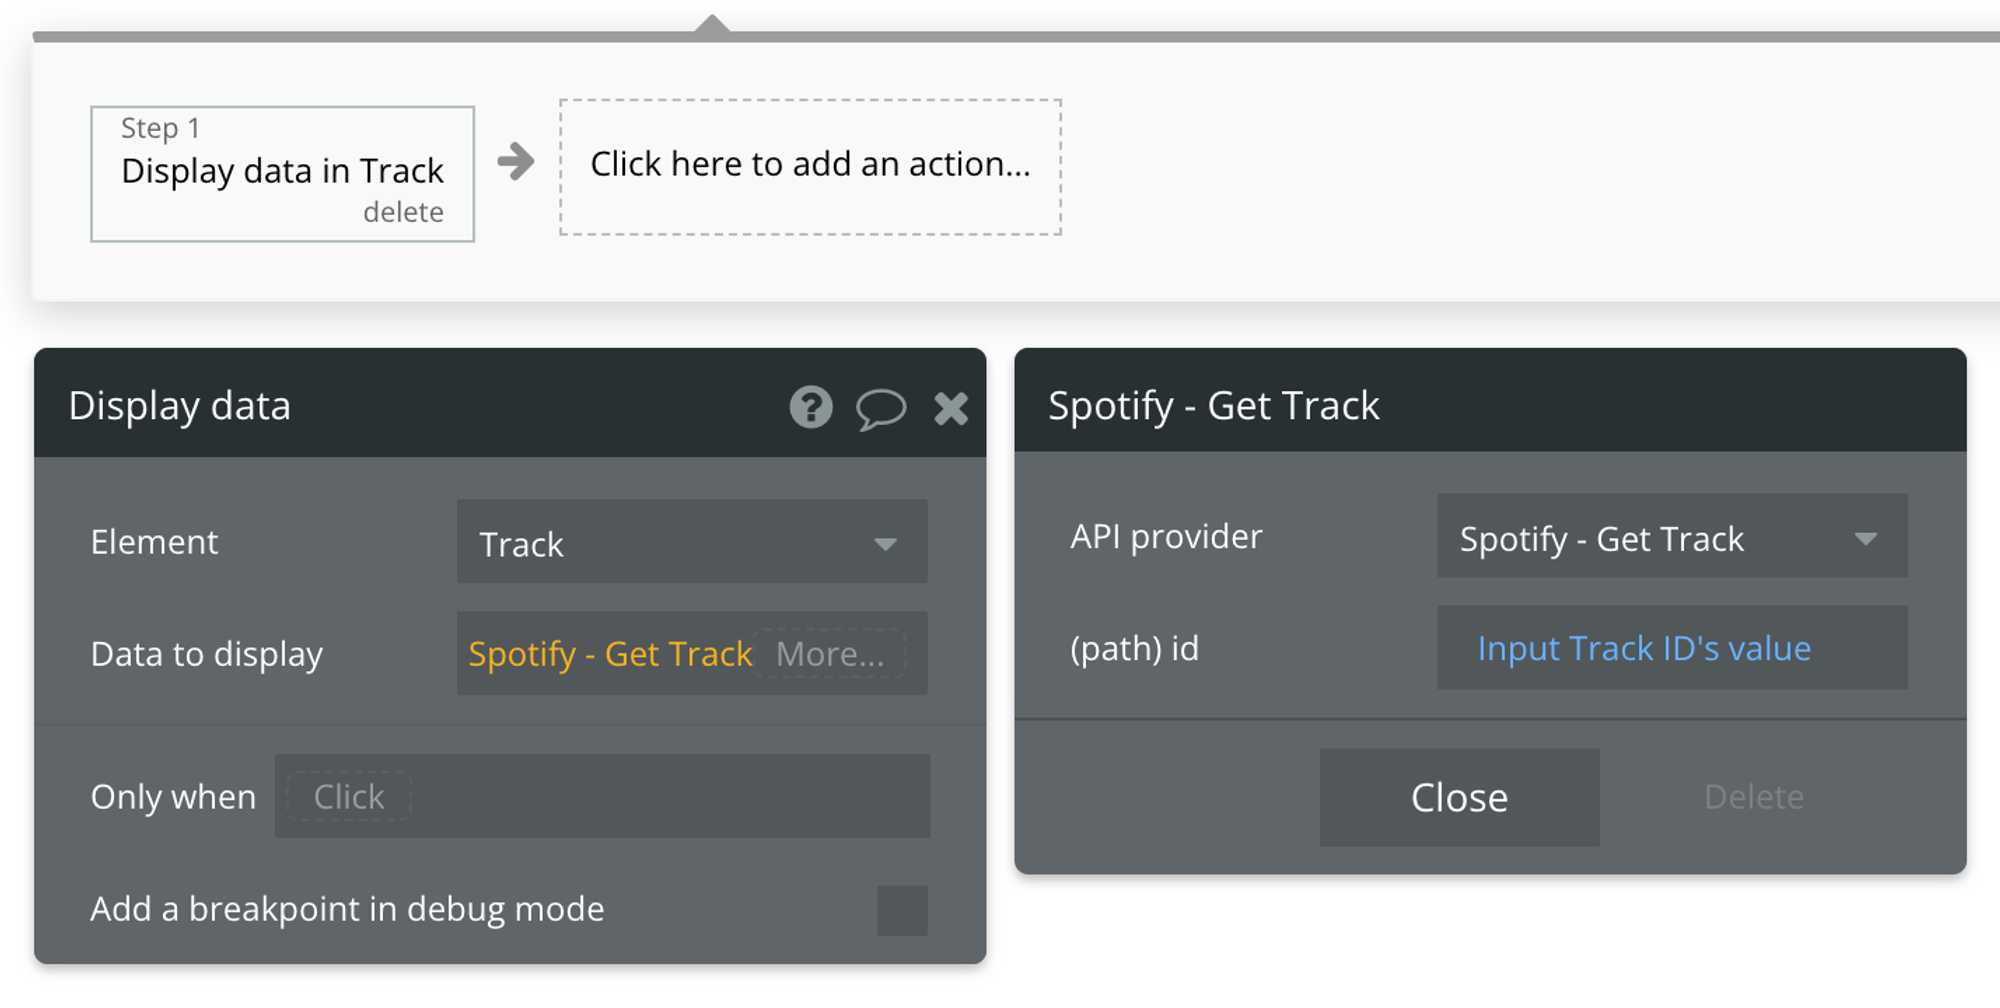 Select "Get data from external API" from the list of data sources, then find Spotify - Get Track from the list of API providers